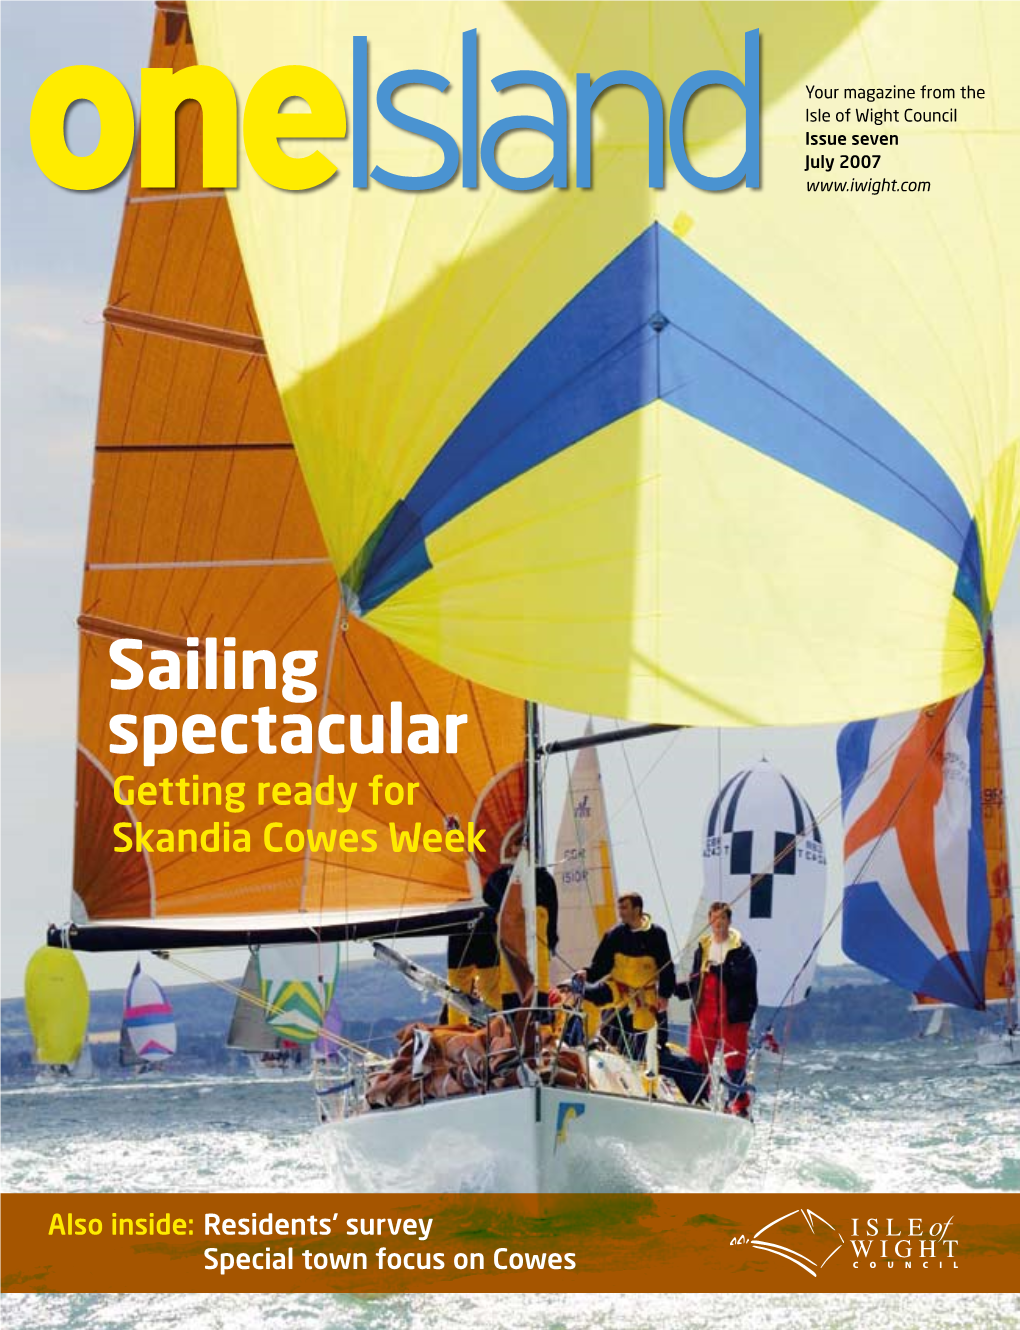 One Island Is Published Each Month, Except for September and January – M These Editions Are Combined with Those of the Previous Month